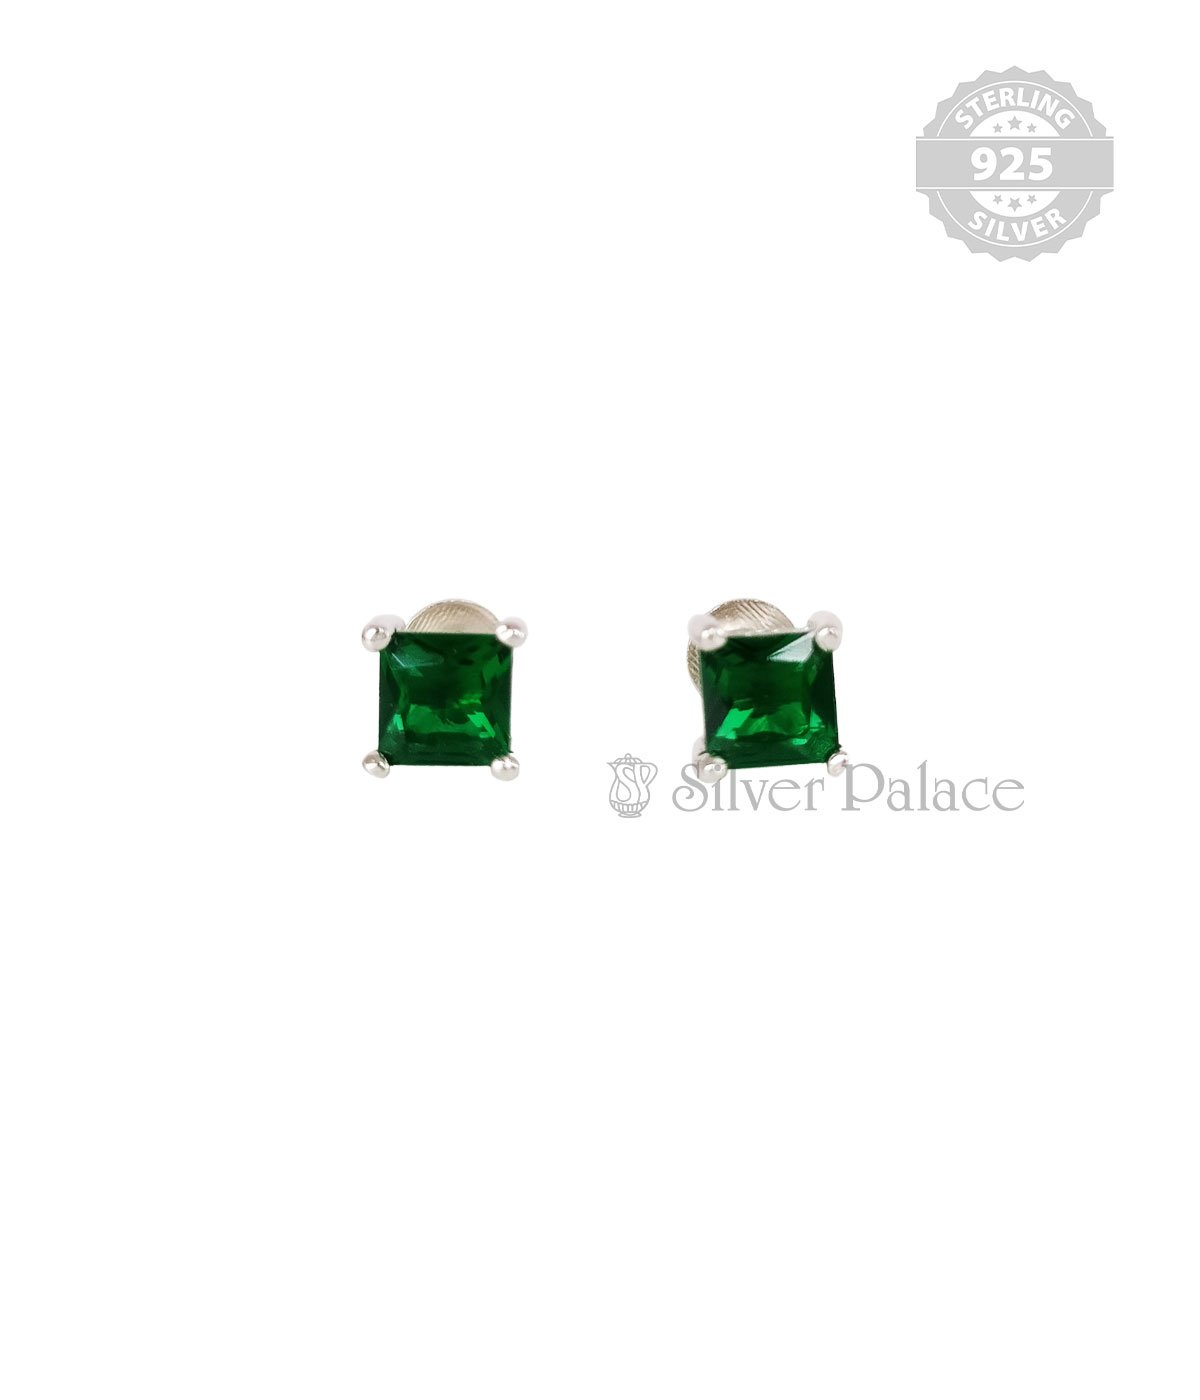 92.5 STERLING SILVER SQUARE SOLITAIRE EMERALD STUD 